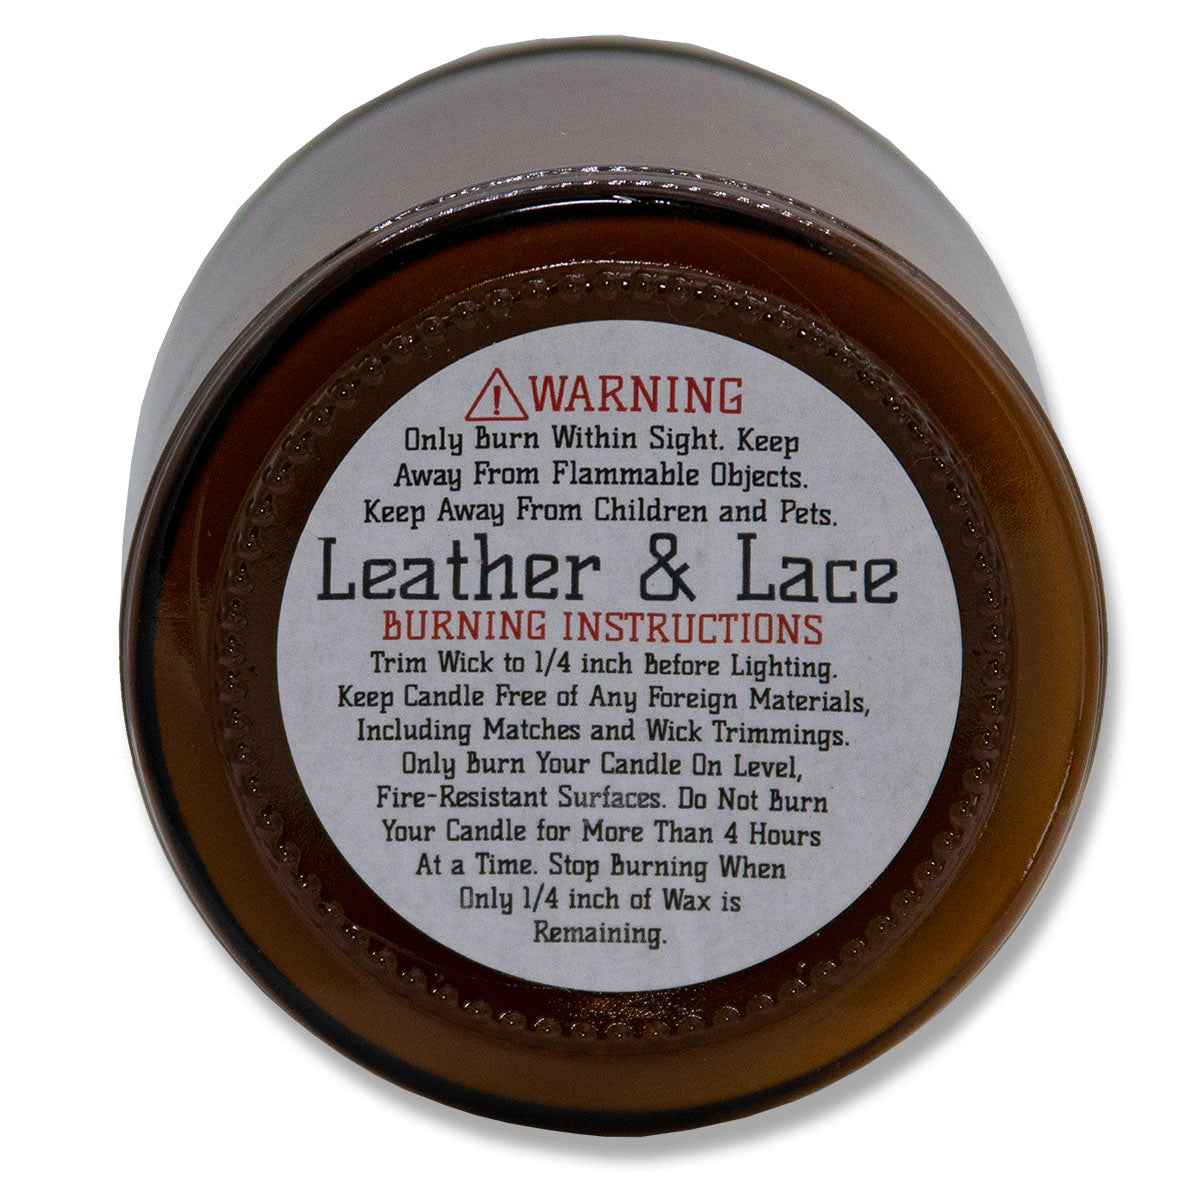 Leather & Lace, Lone Star Candles & More's Premium Hand Poured Strong Scented Soy Wax Gift Candle, Aroma of Genuine Leather & Creamy Vanilla, USA Made in Texas, Amber Glass Jars, 9oz Happy Birthday